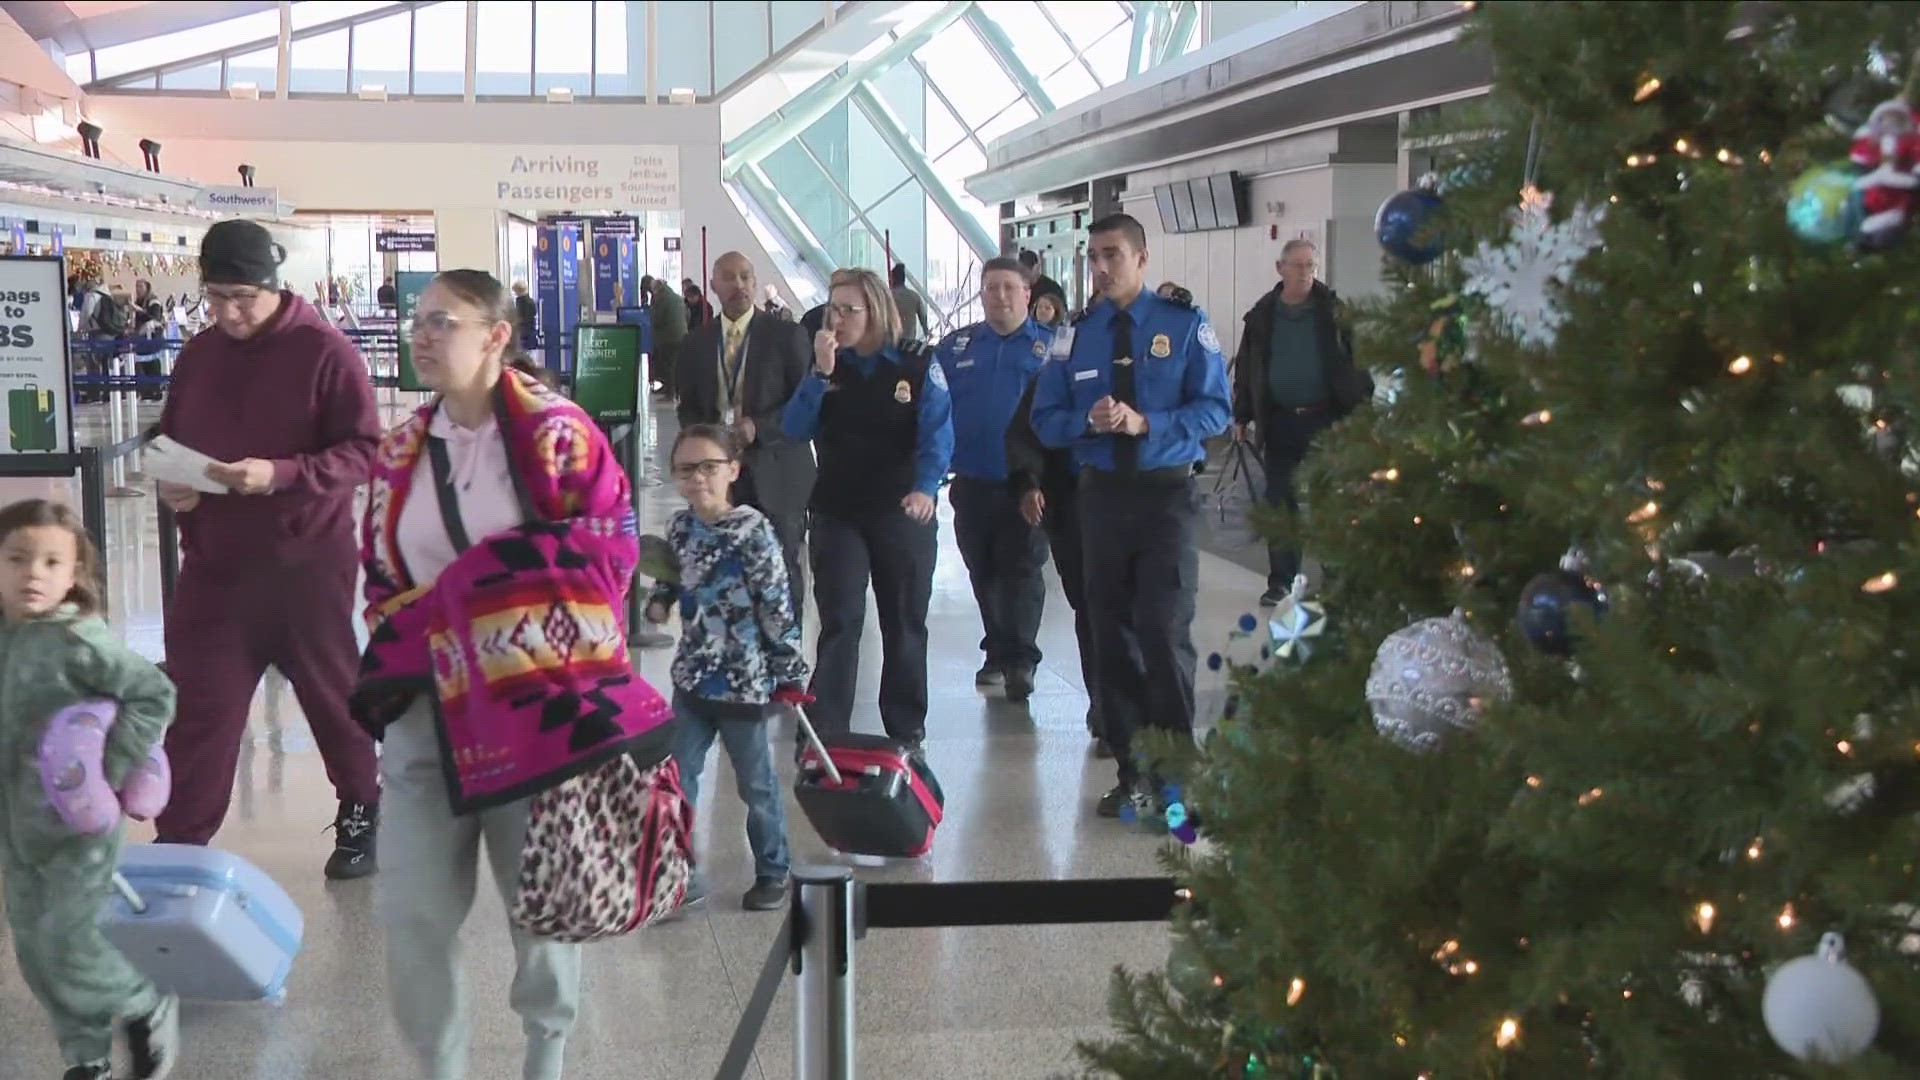 According to AAA, 7.5 million people will fly between Dec. 23 and New Year's Day, and TSA is prepping for the increase in travelers.